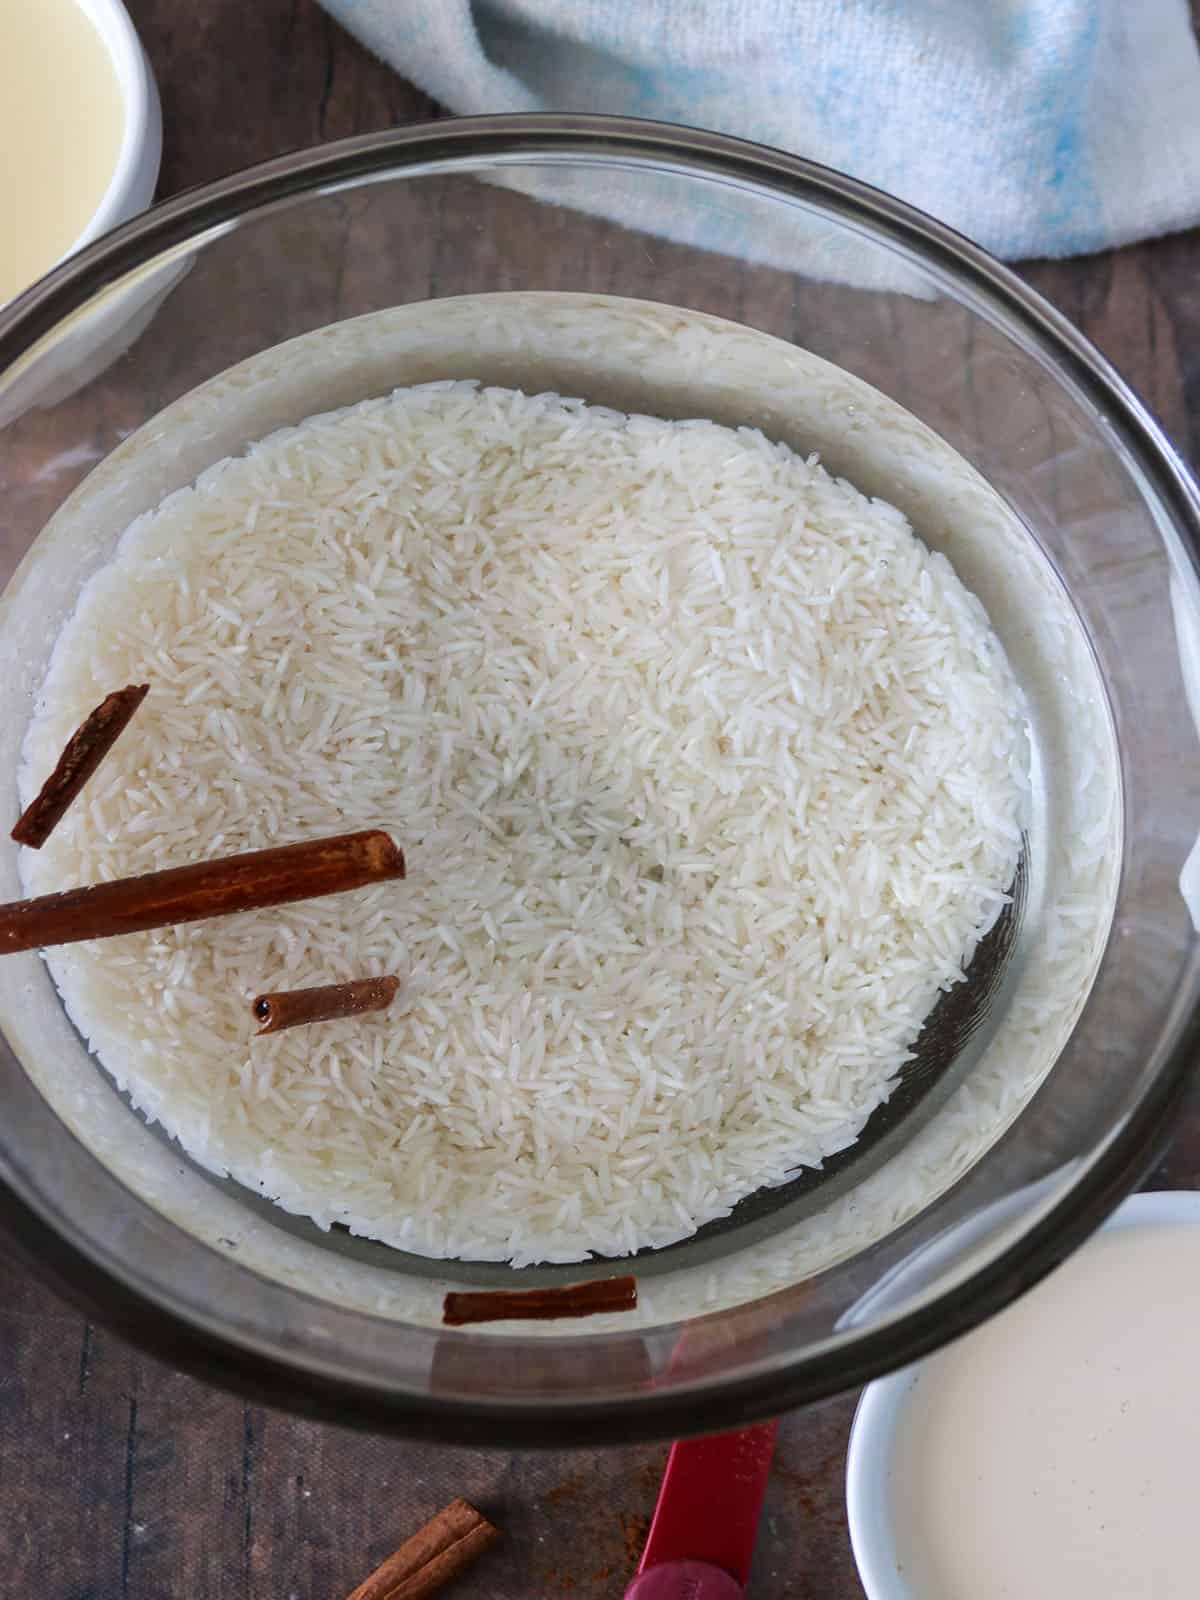 soaking rice and cinnamon sticks in a bowl of water